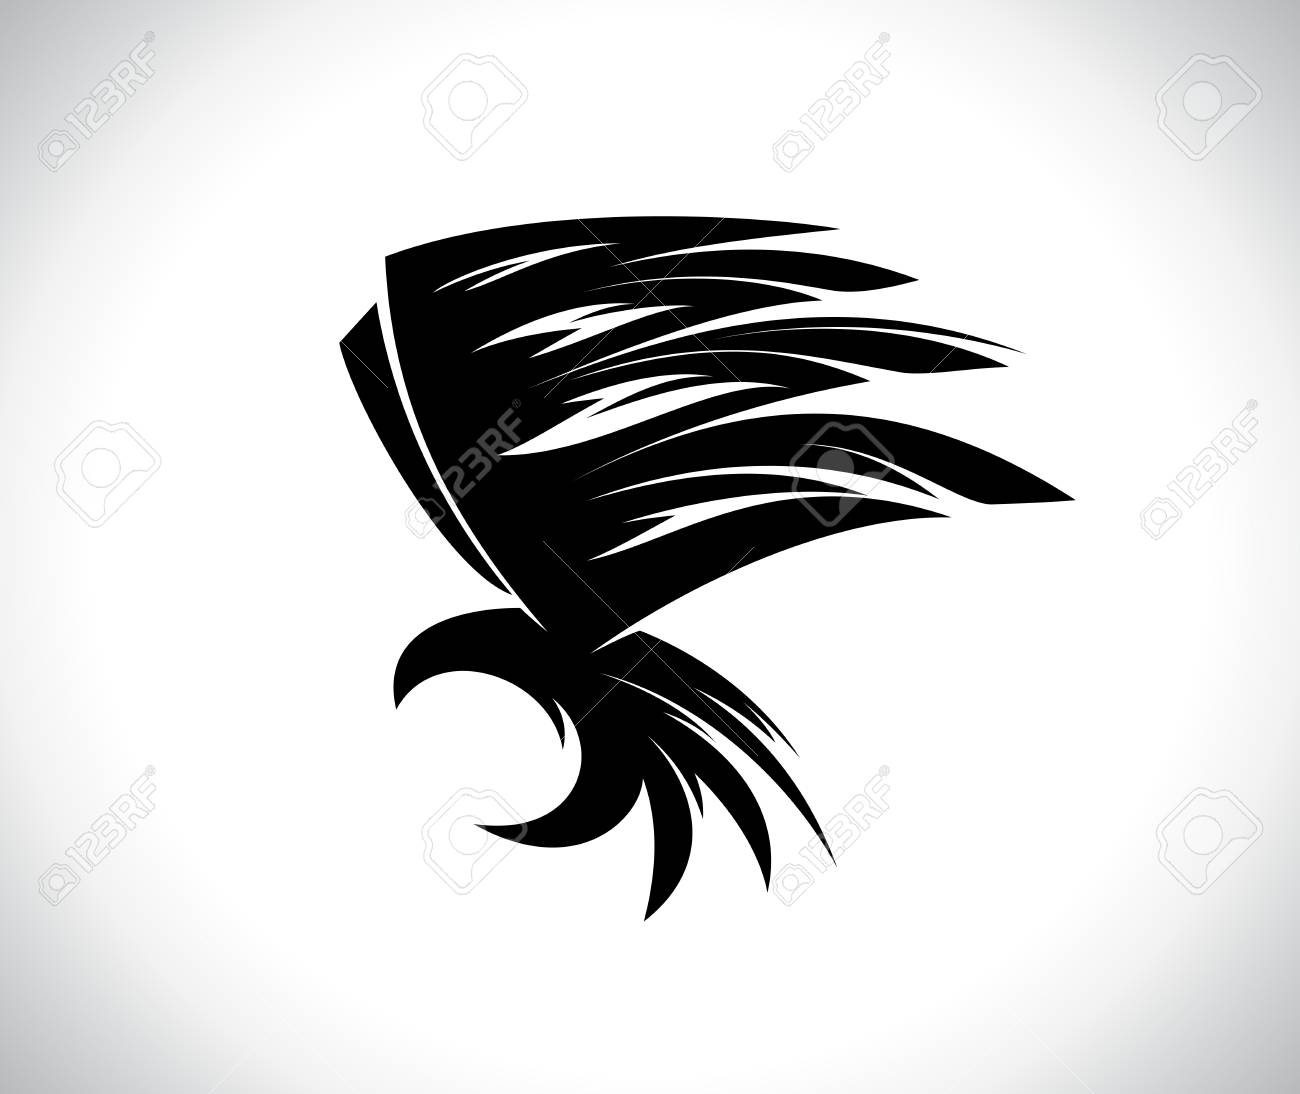 Flying Eagle Bird Tattoo Tribal Style Royalty Free Cliparts within dimensions 1300 X 1094